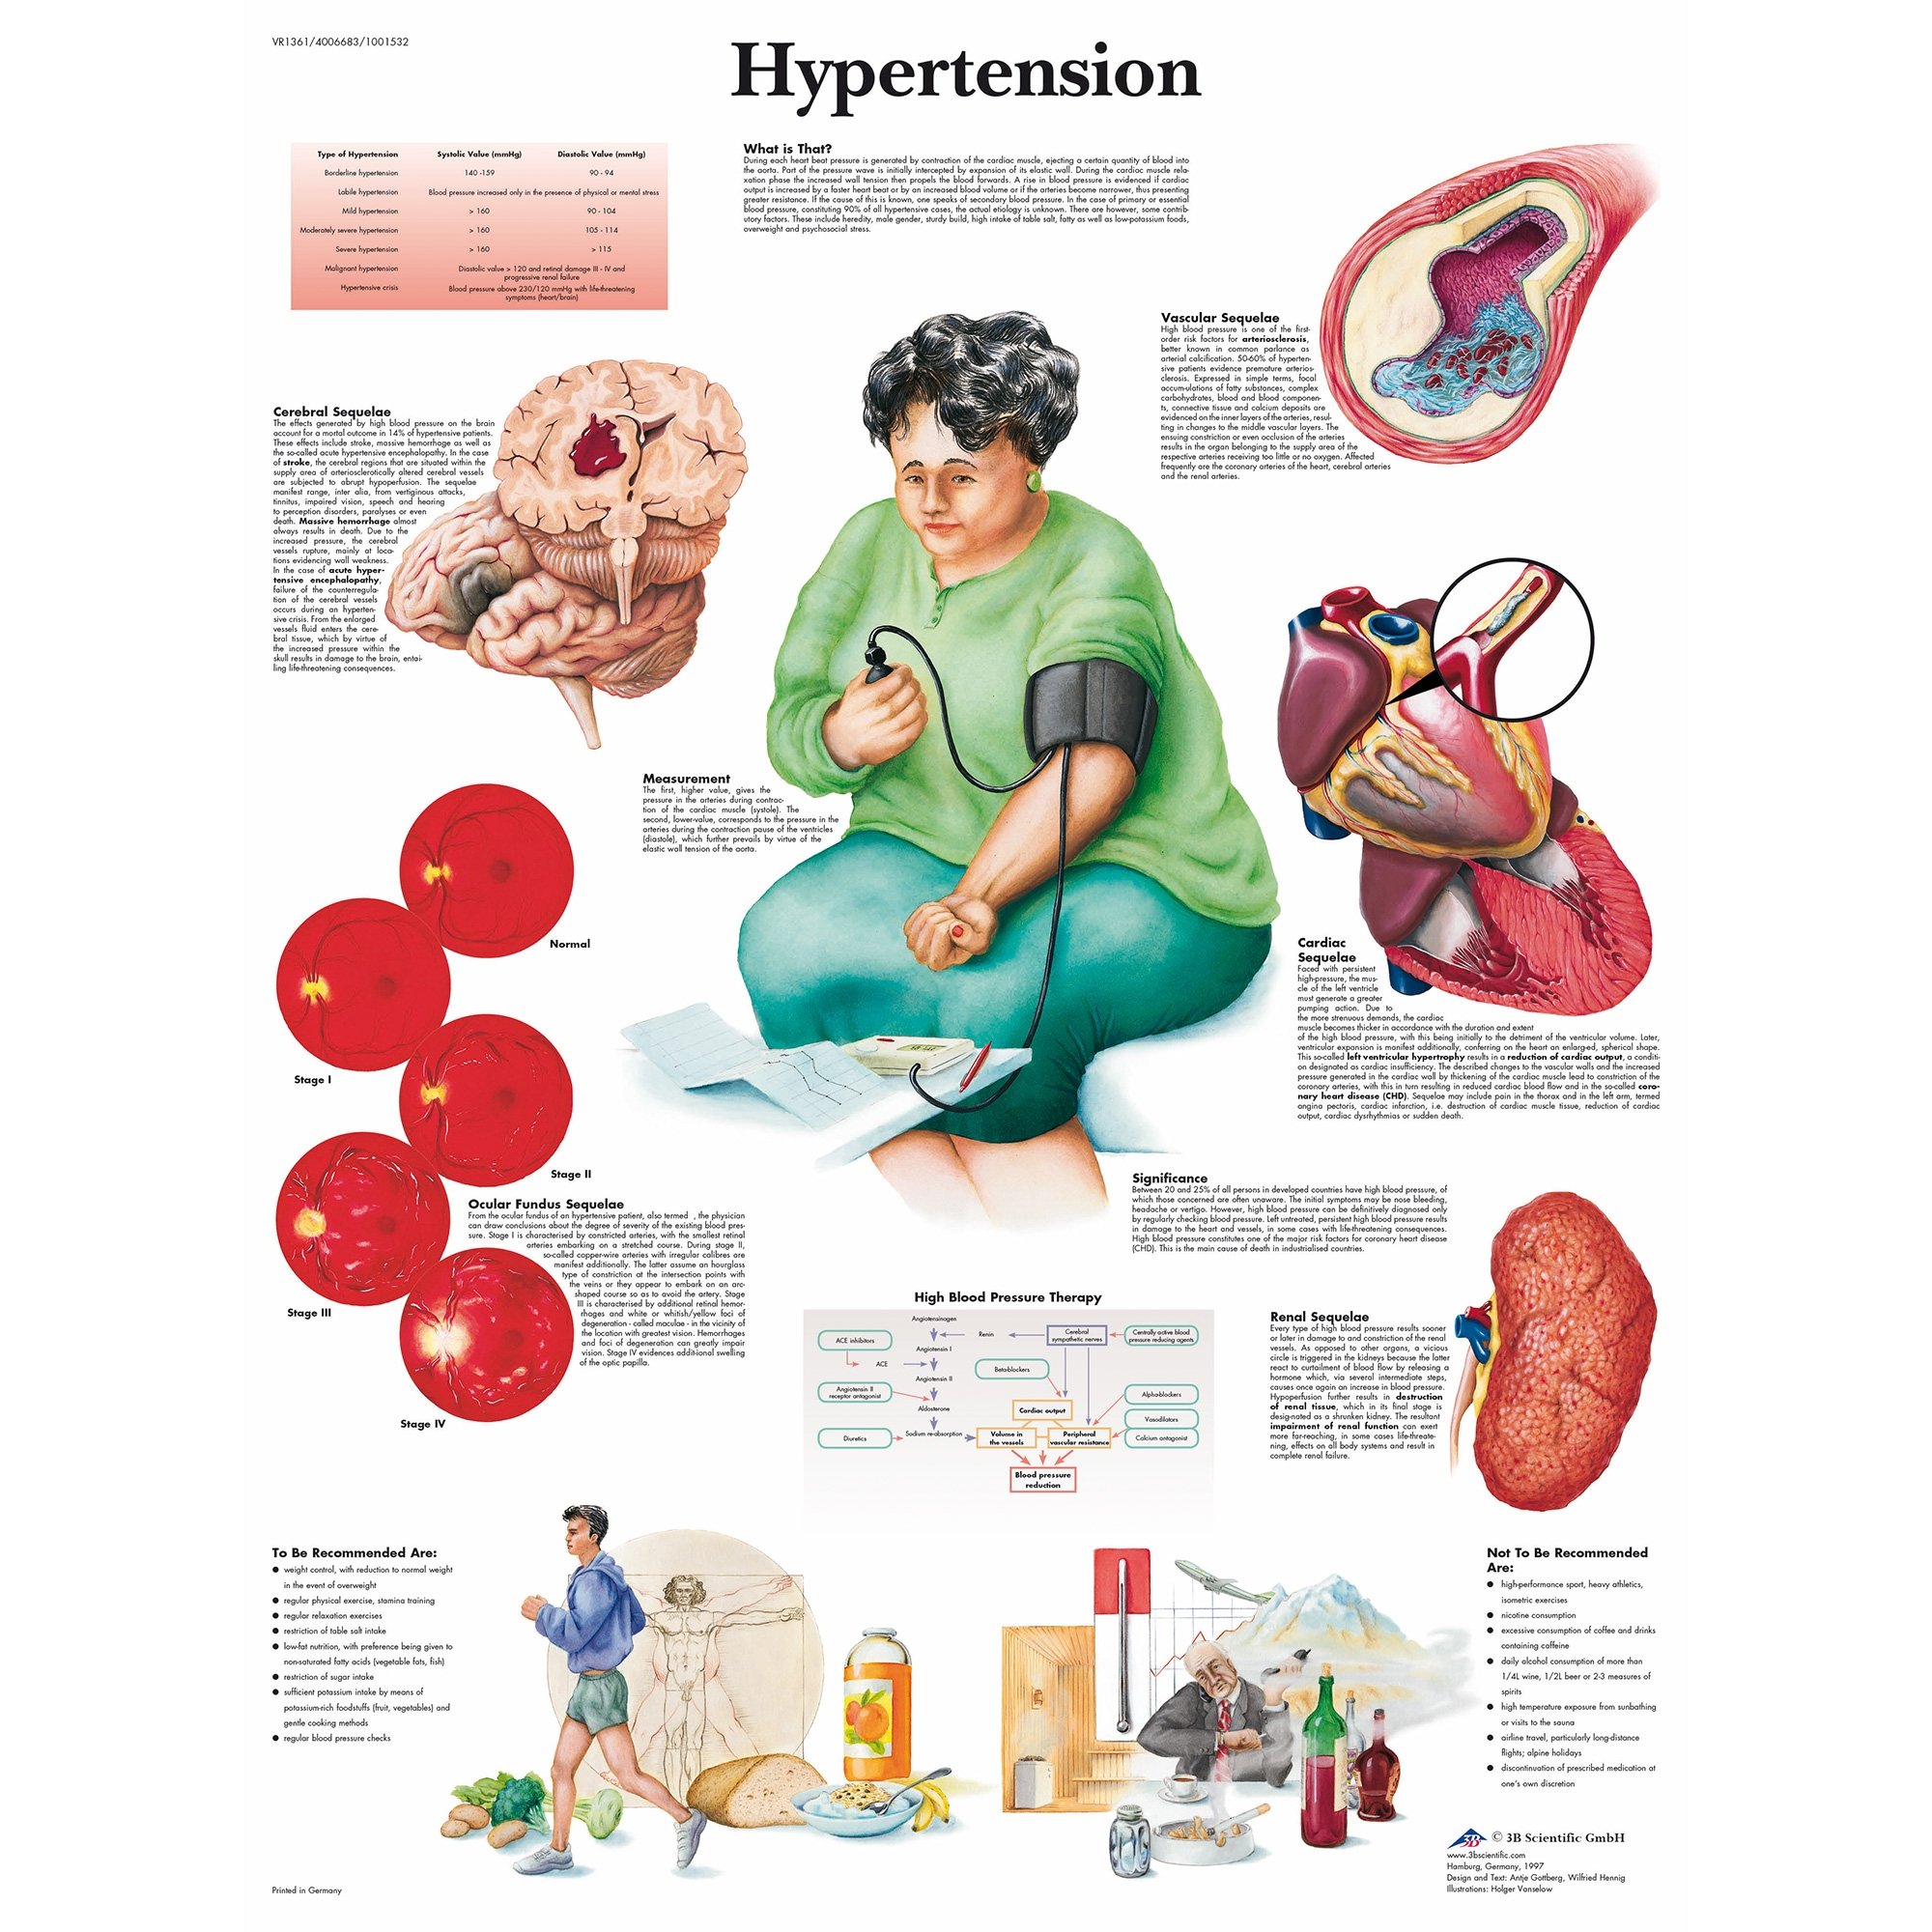 research topics related to hypertension